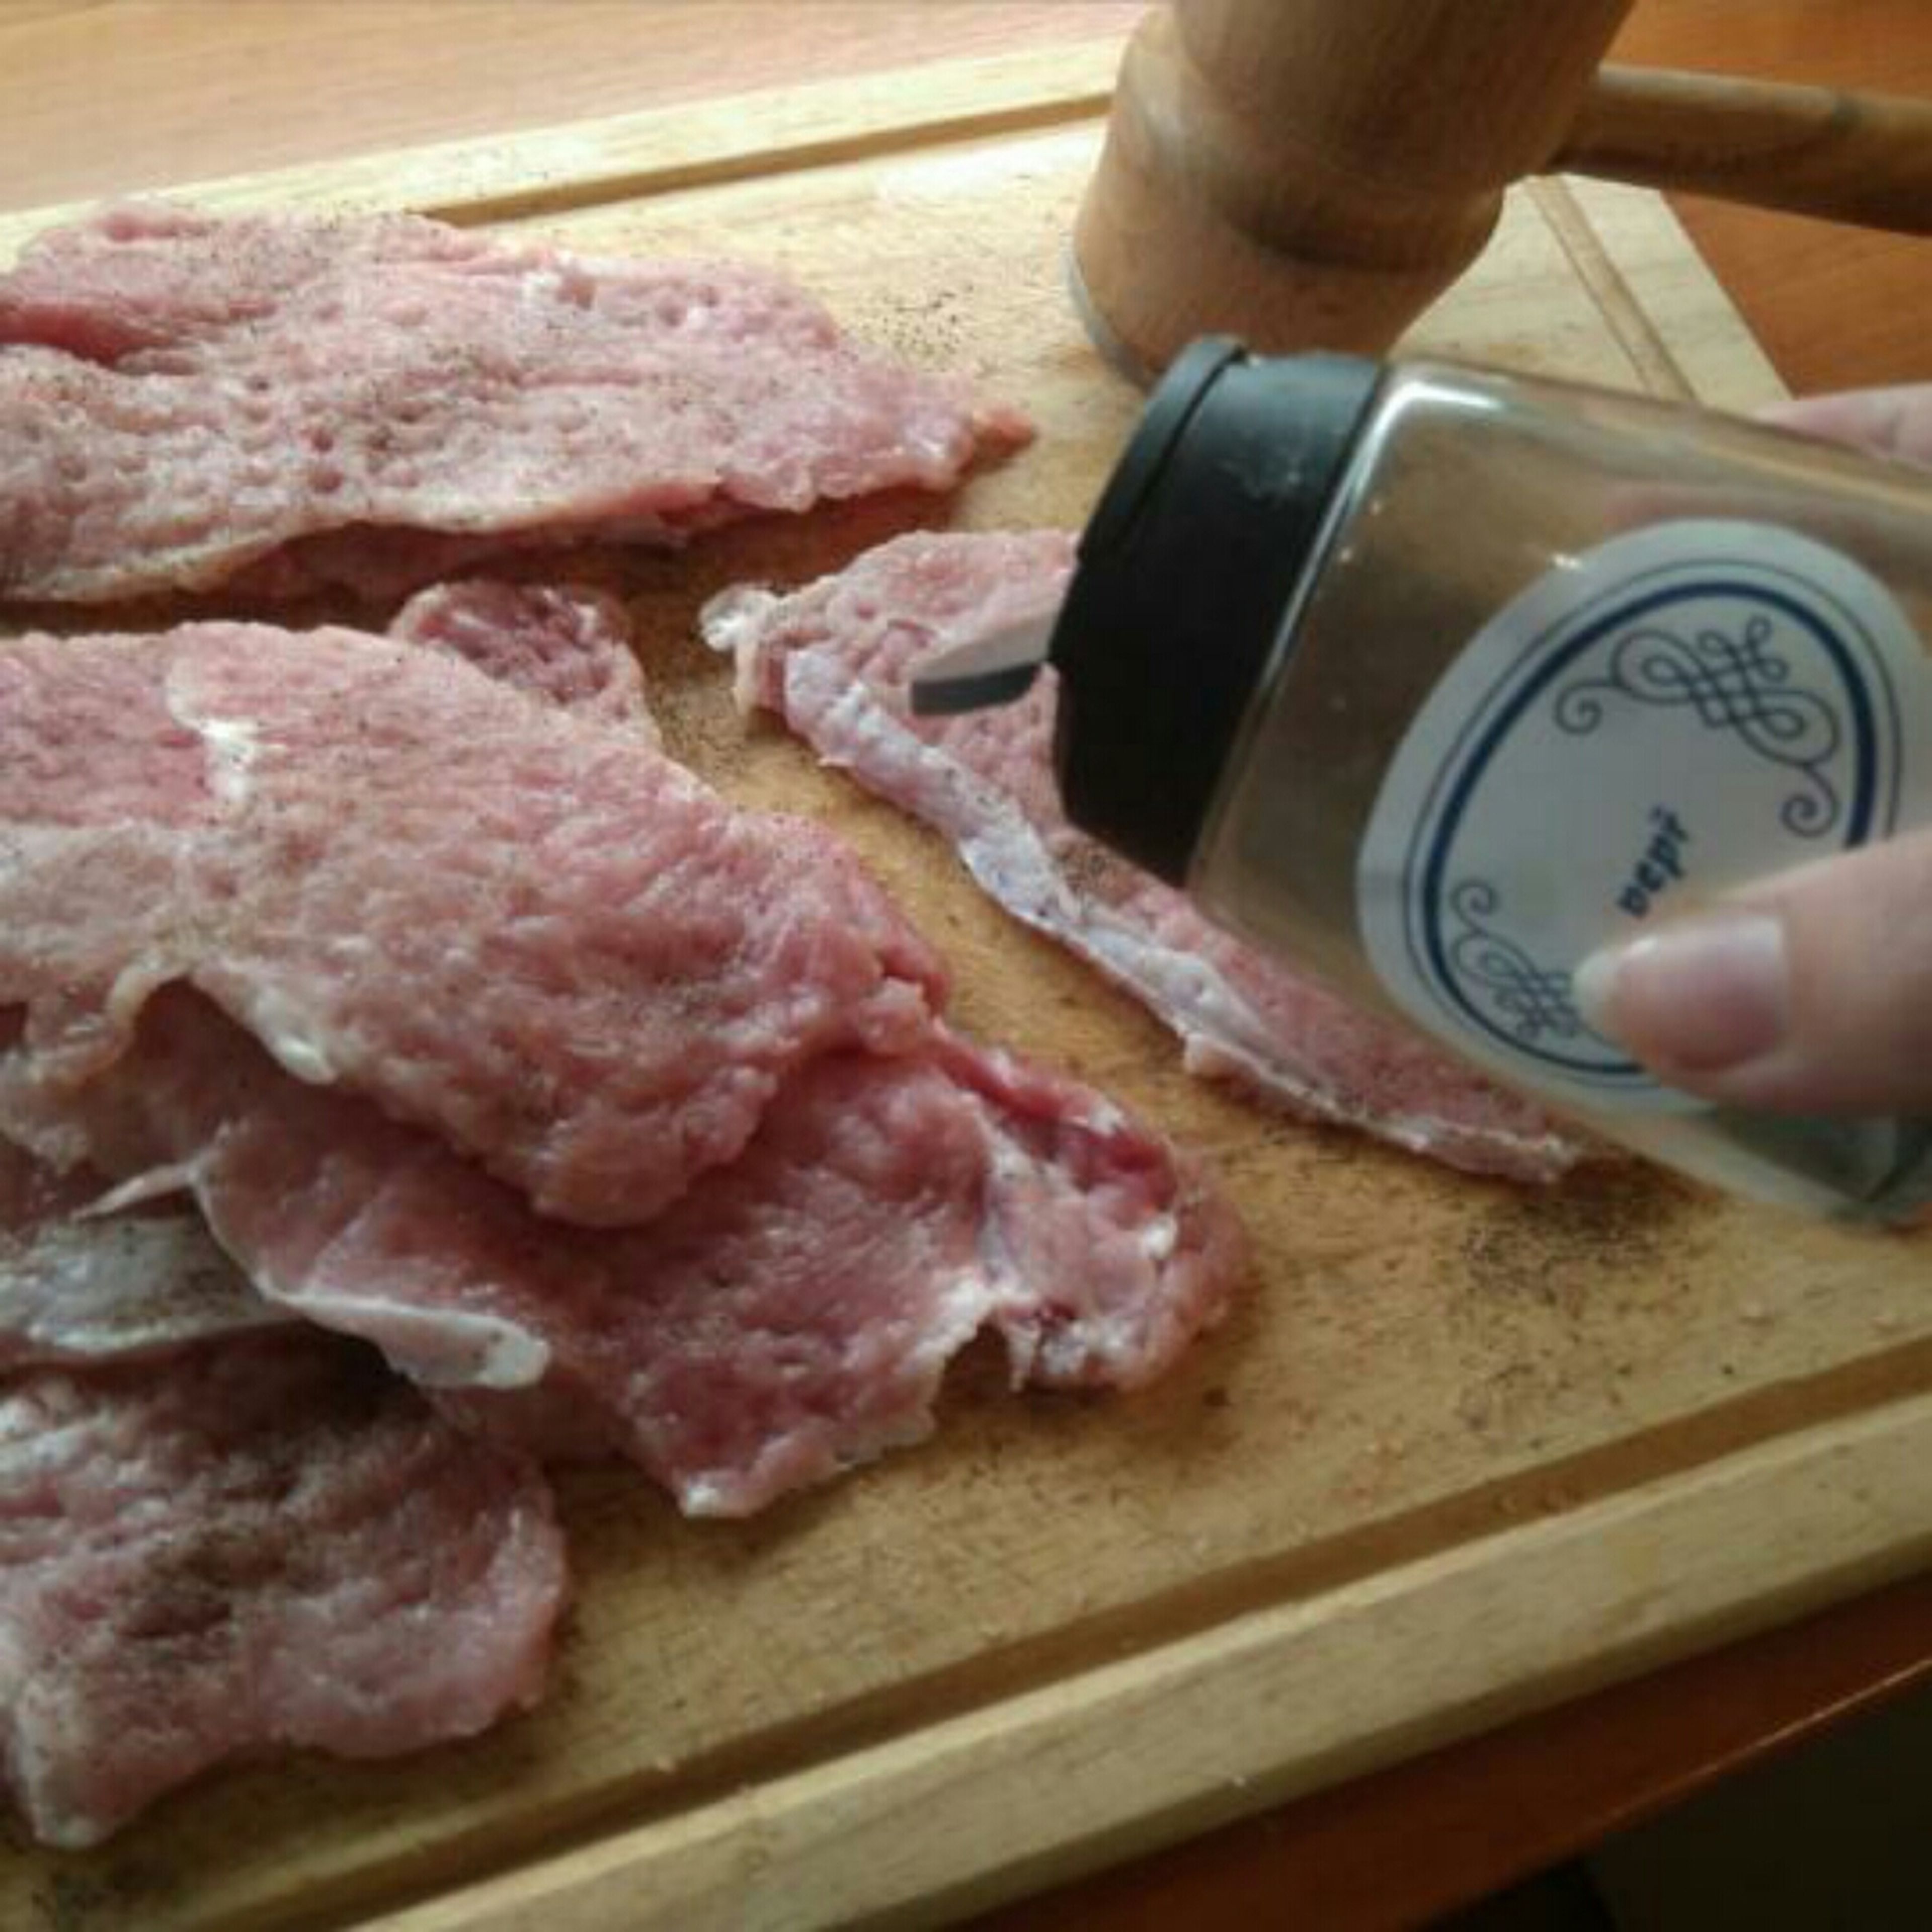 Then tap the meat on both sides and salt and pepper.